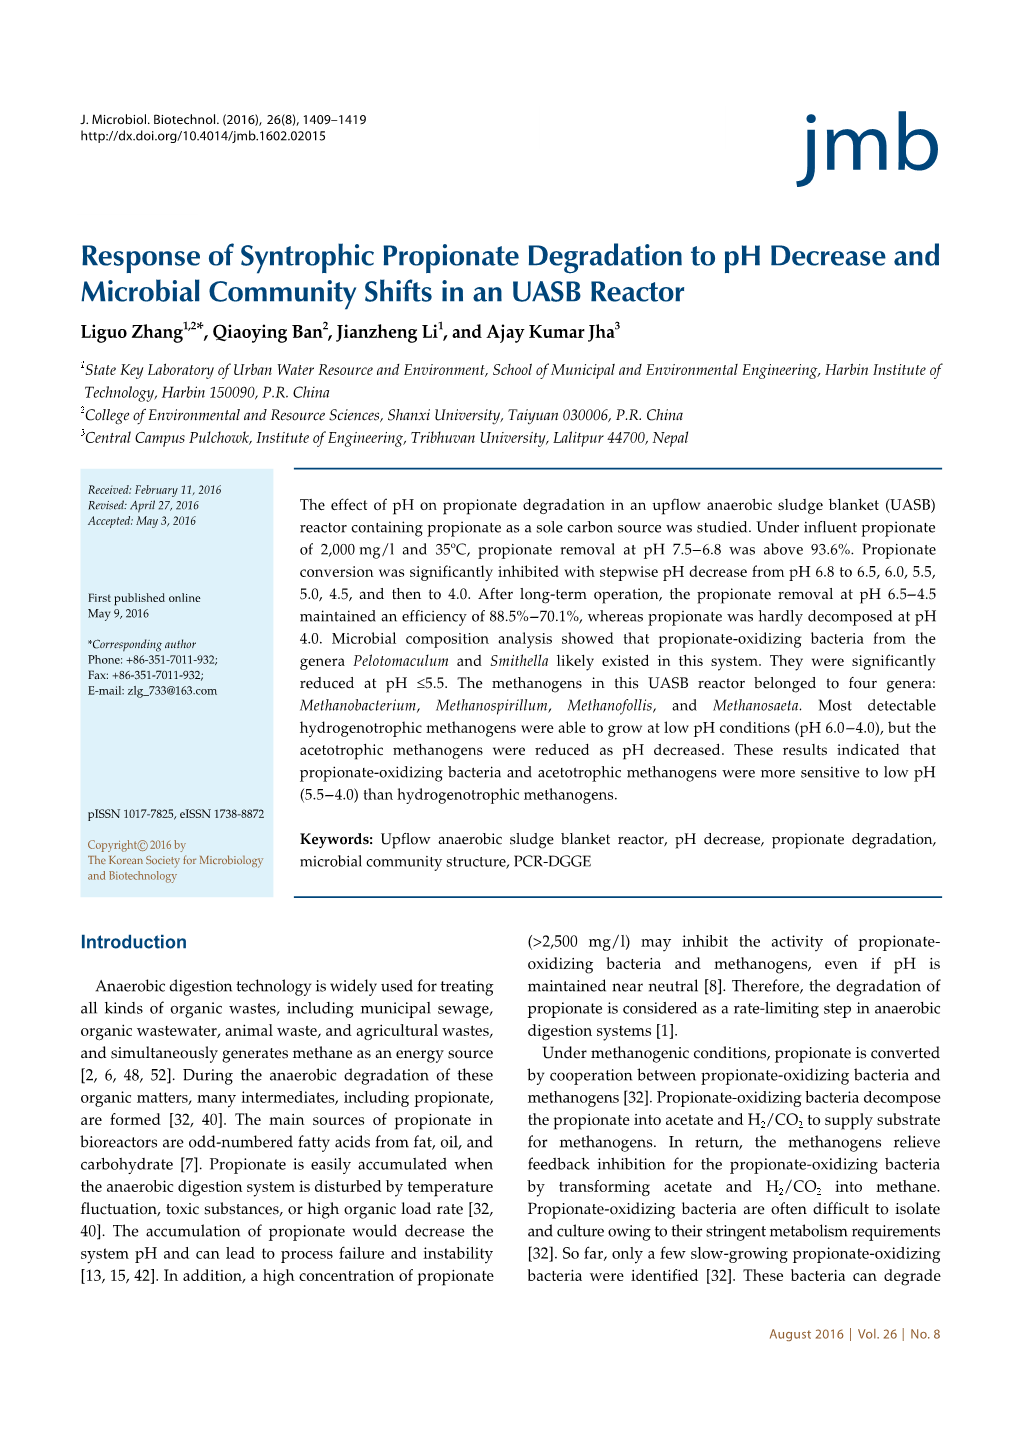 Response of Syntrophic Propionate Degradation to Ph Decrease And